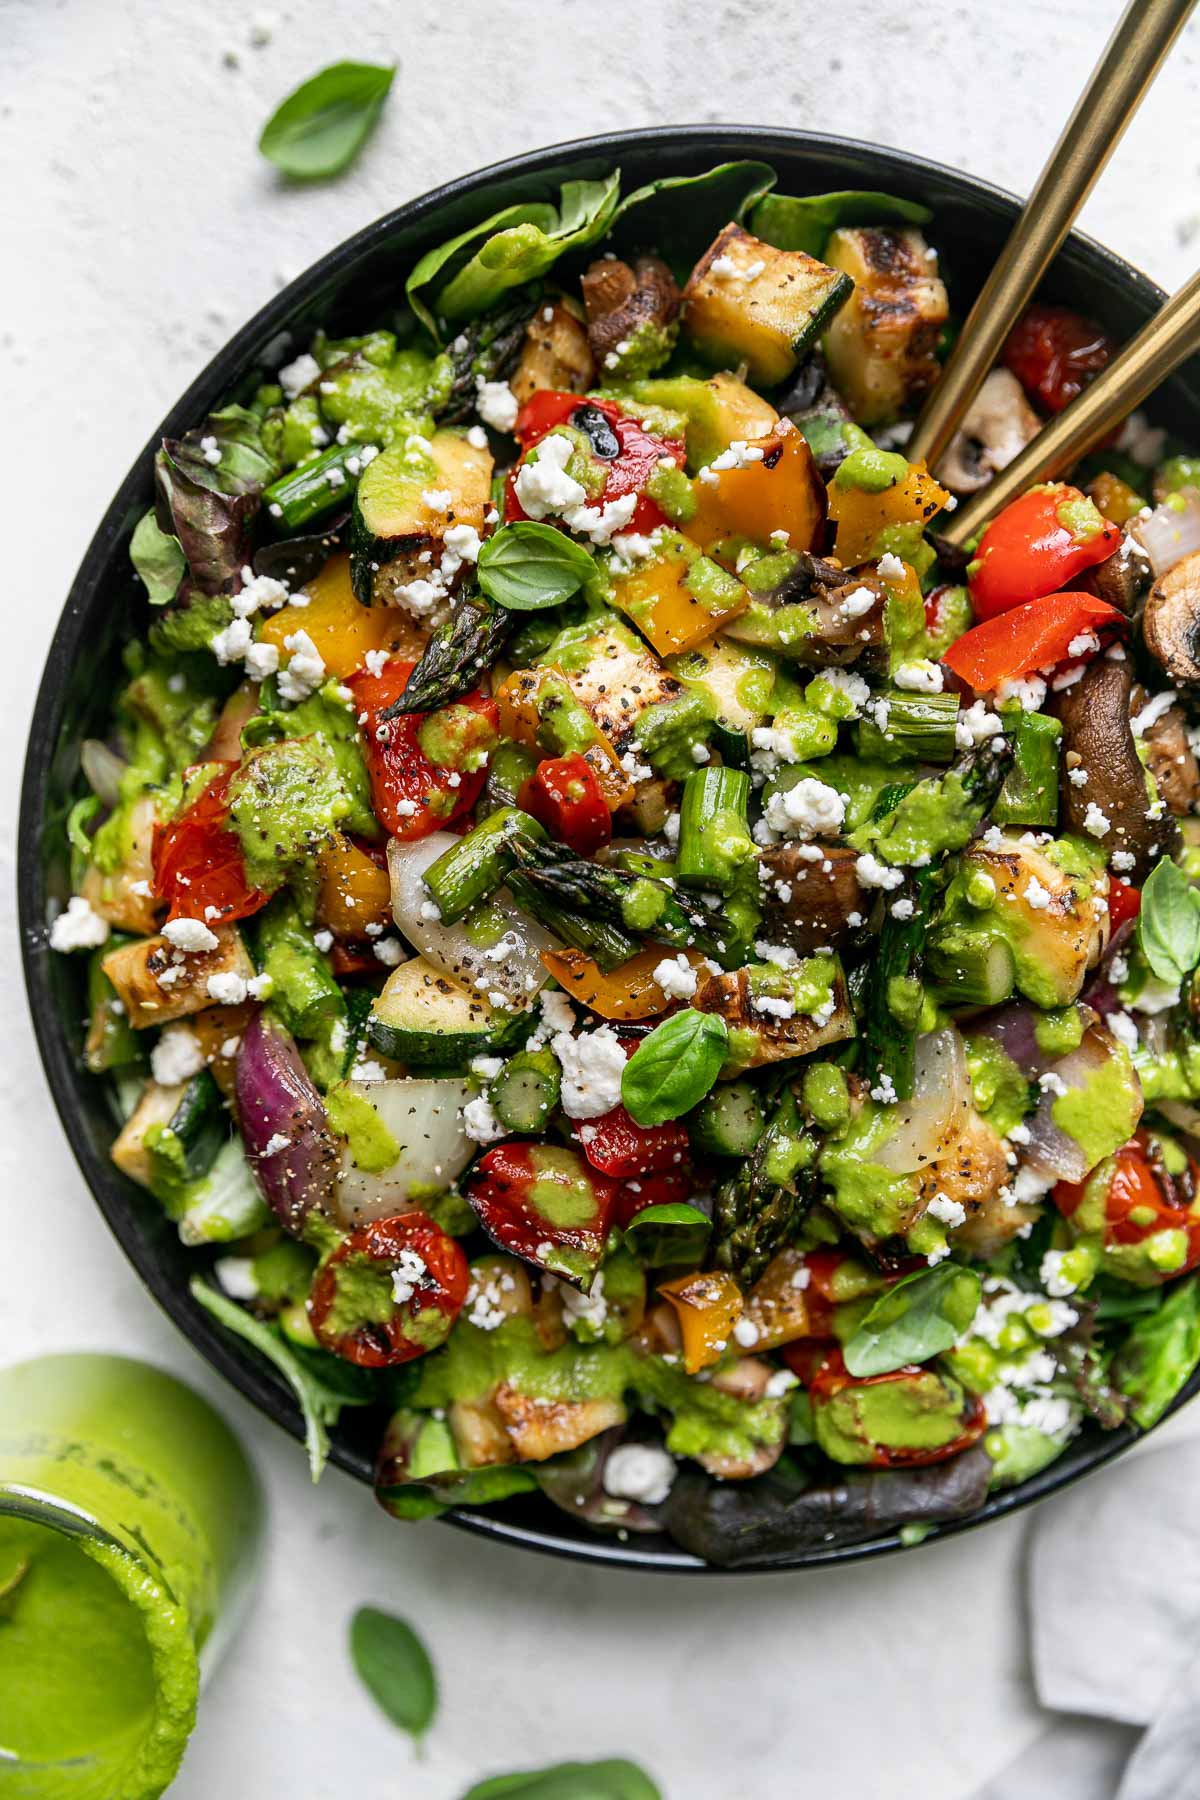 Chopped grilled vegetable salad in a large black serving bowl atop a gray linen napkin on a light gray surface. 2 gold serving spoons are nestled into the chopped vegetable salad. Fresh basil leaves & a jar of lemon basil vinaigrettes surround the serving bowl.